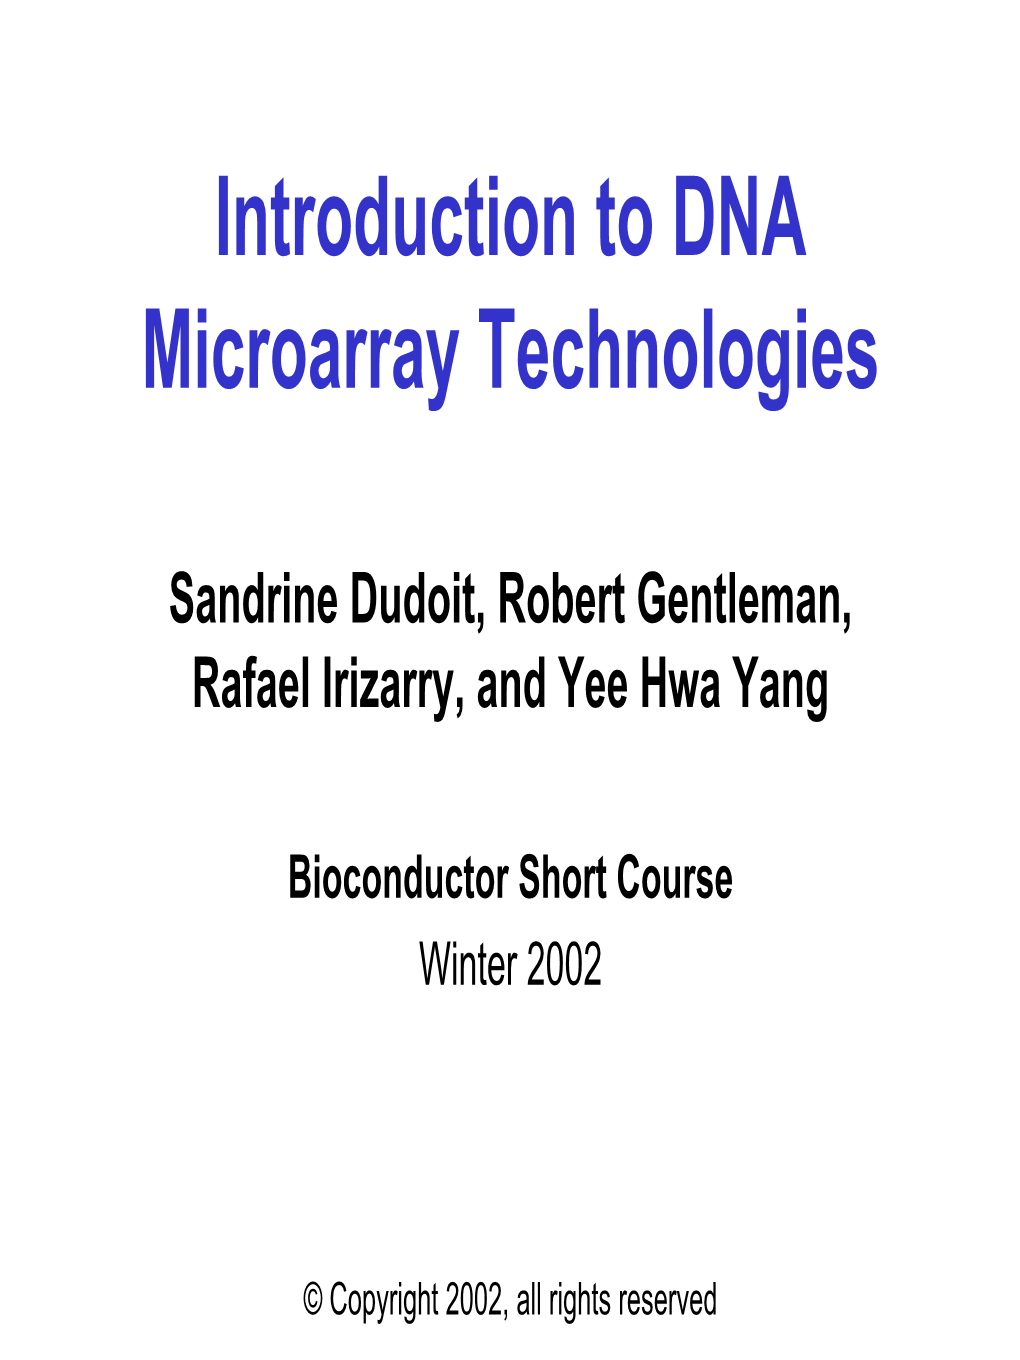 Introduction to DNA Microarray Technologies